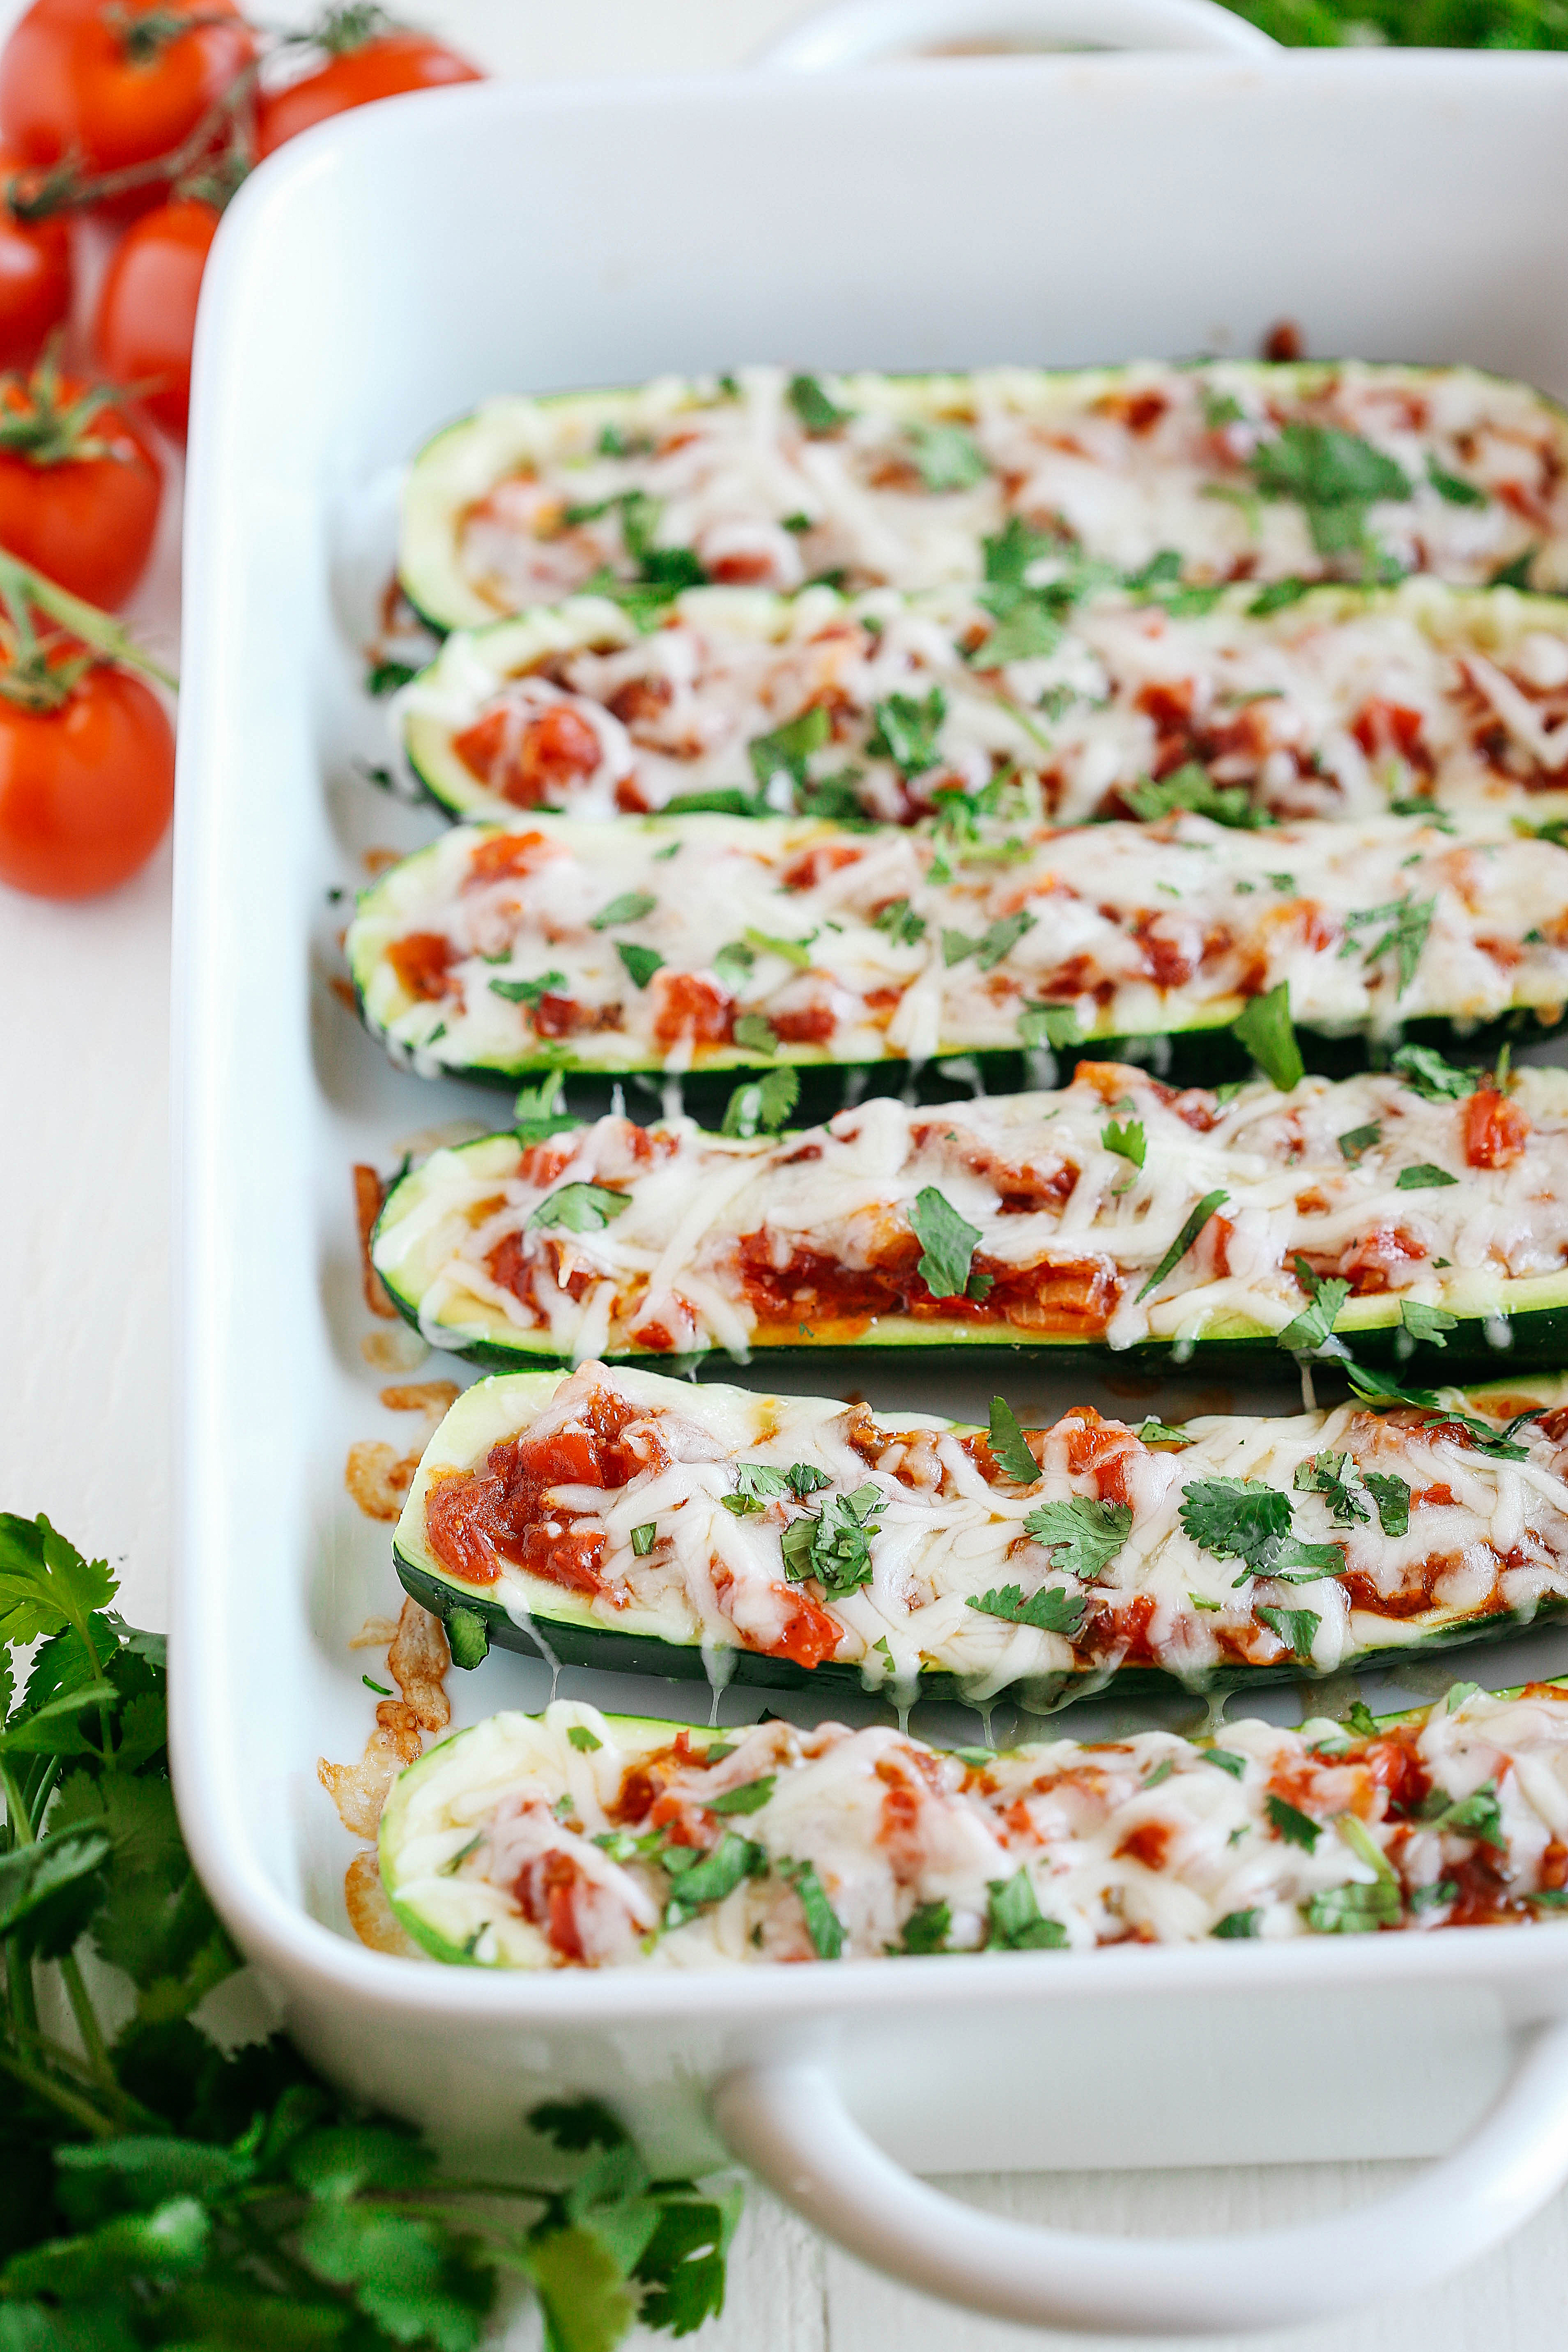 These Enchilada Stuffed Zucchini Boats are super flavorful, easy to make and are a much healthier alternative to your favorite dish!